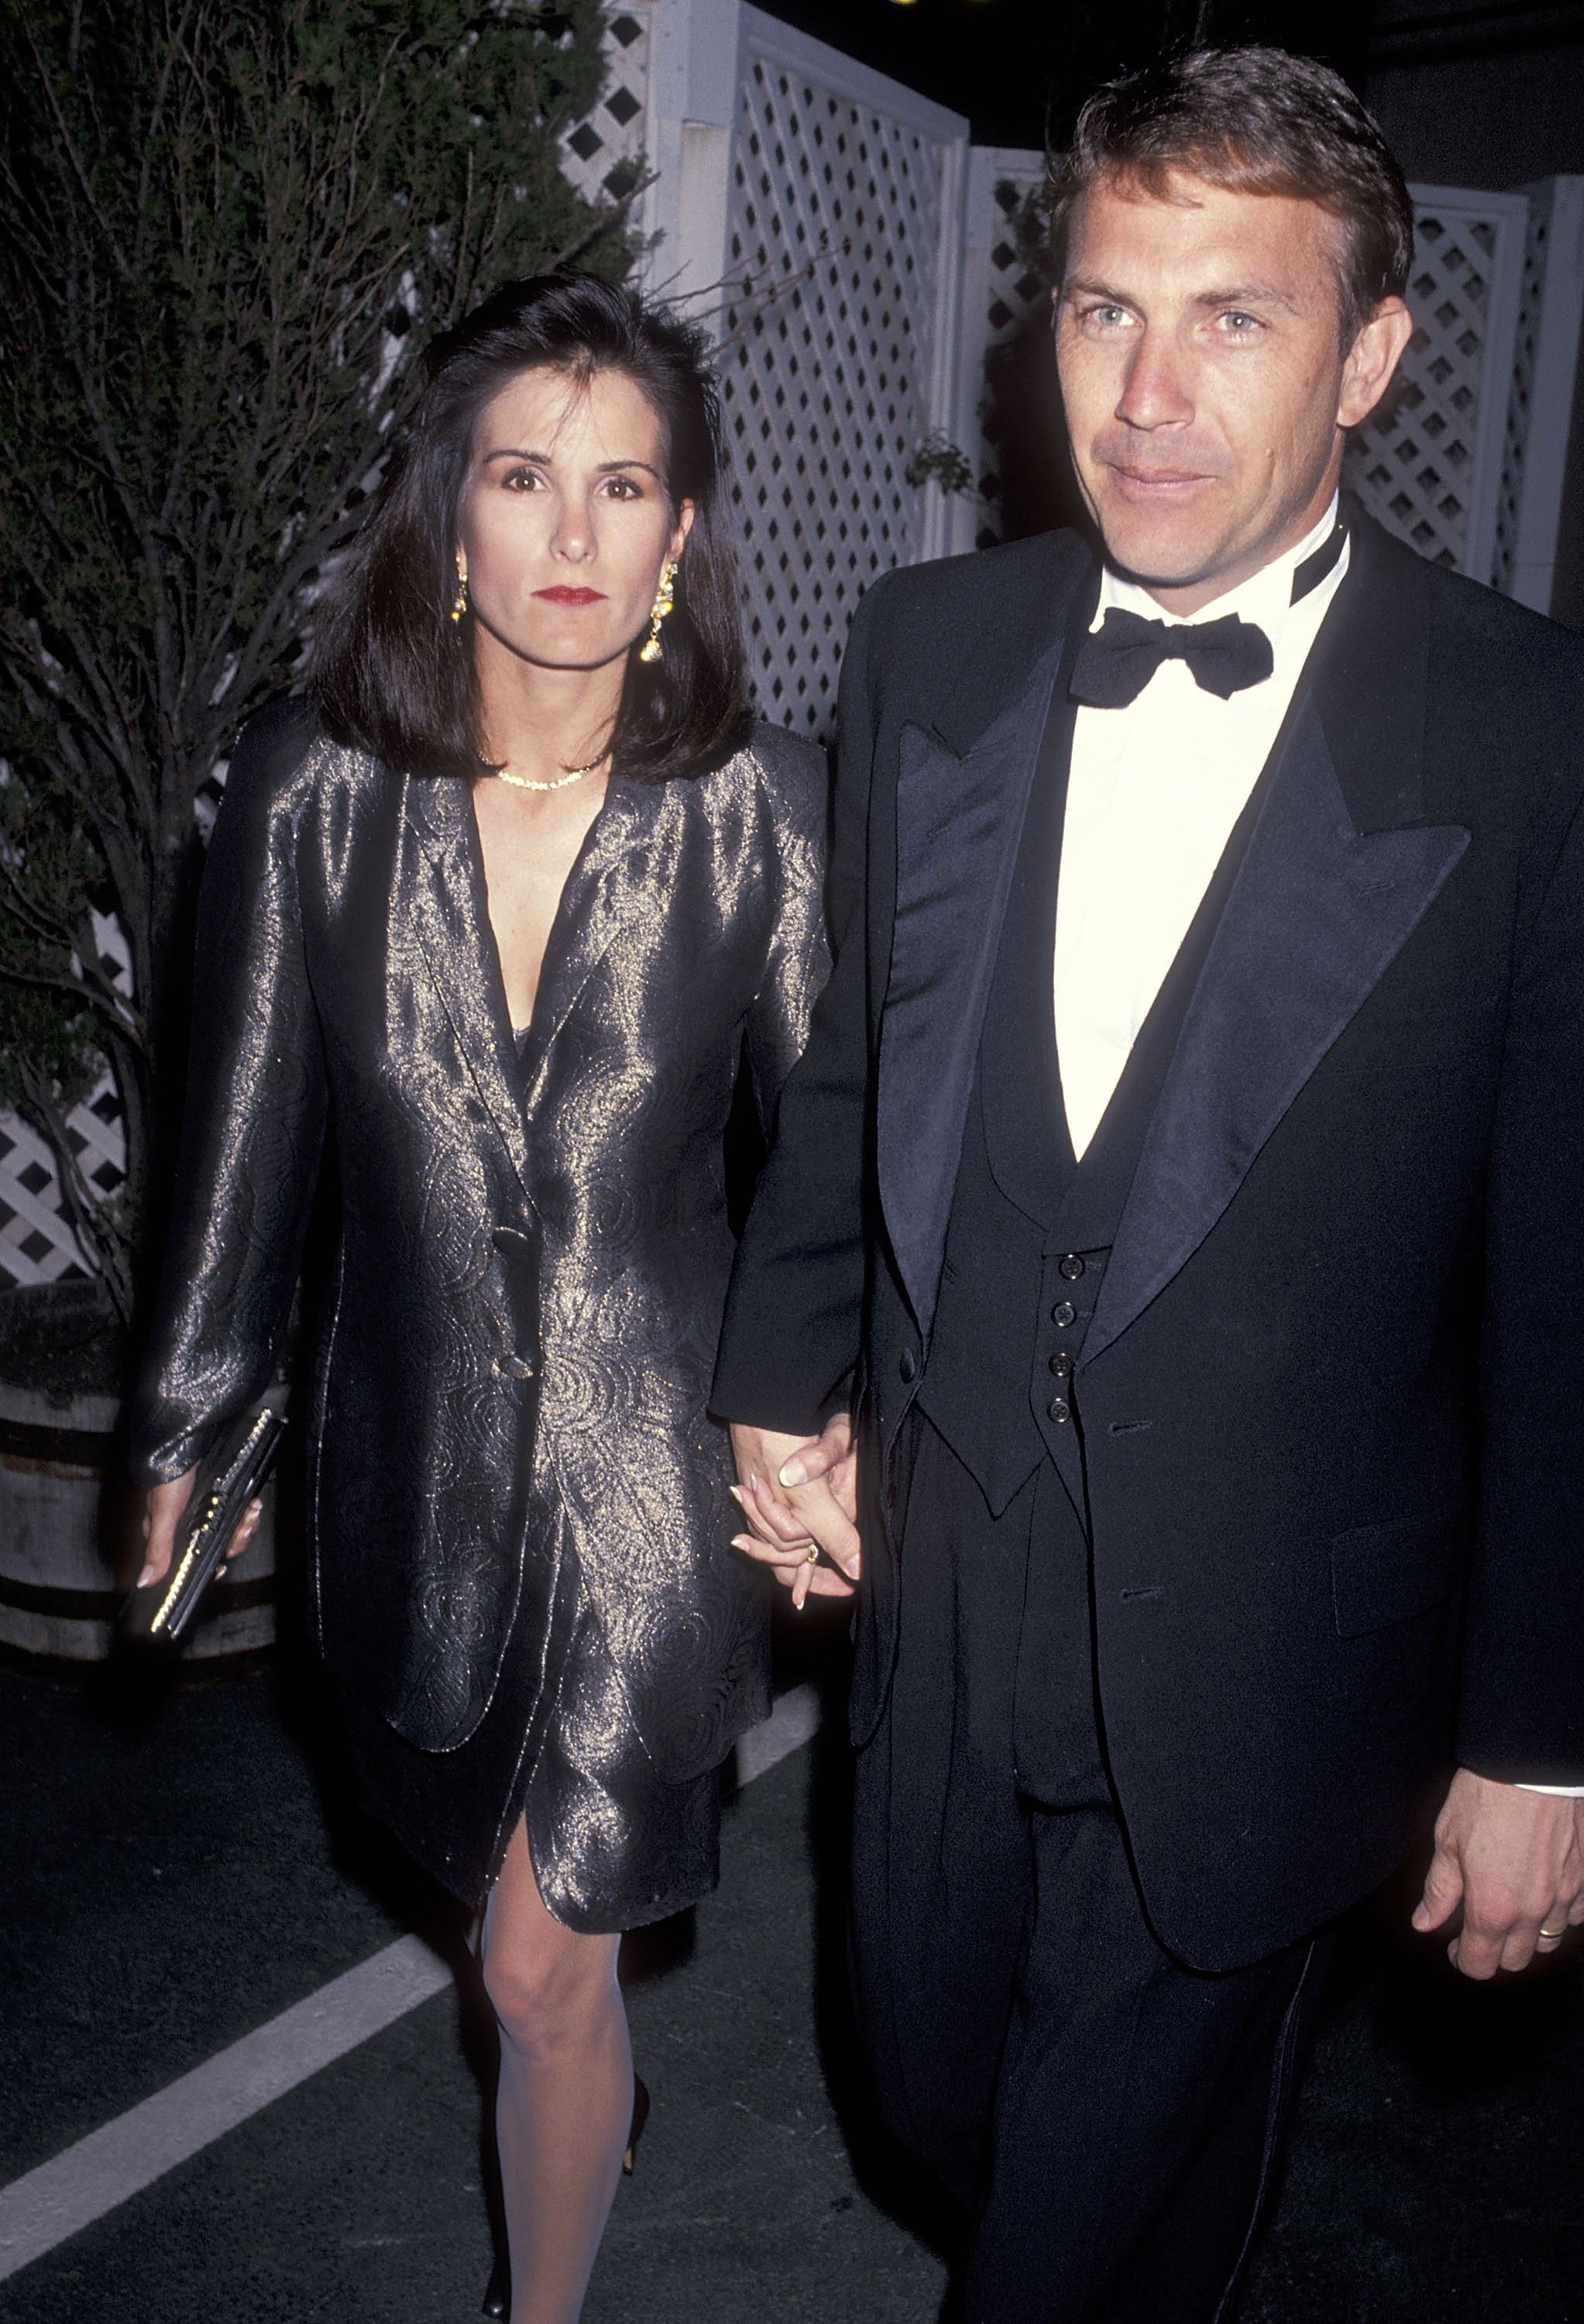 Kevin Costner and Cindy Costner attend The Movie Awards at Universal Amphitheatre in Universal City, California on January 30, 1991 | Source: Getty Images